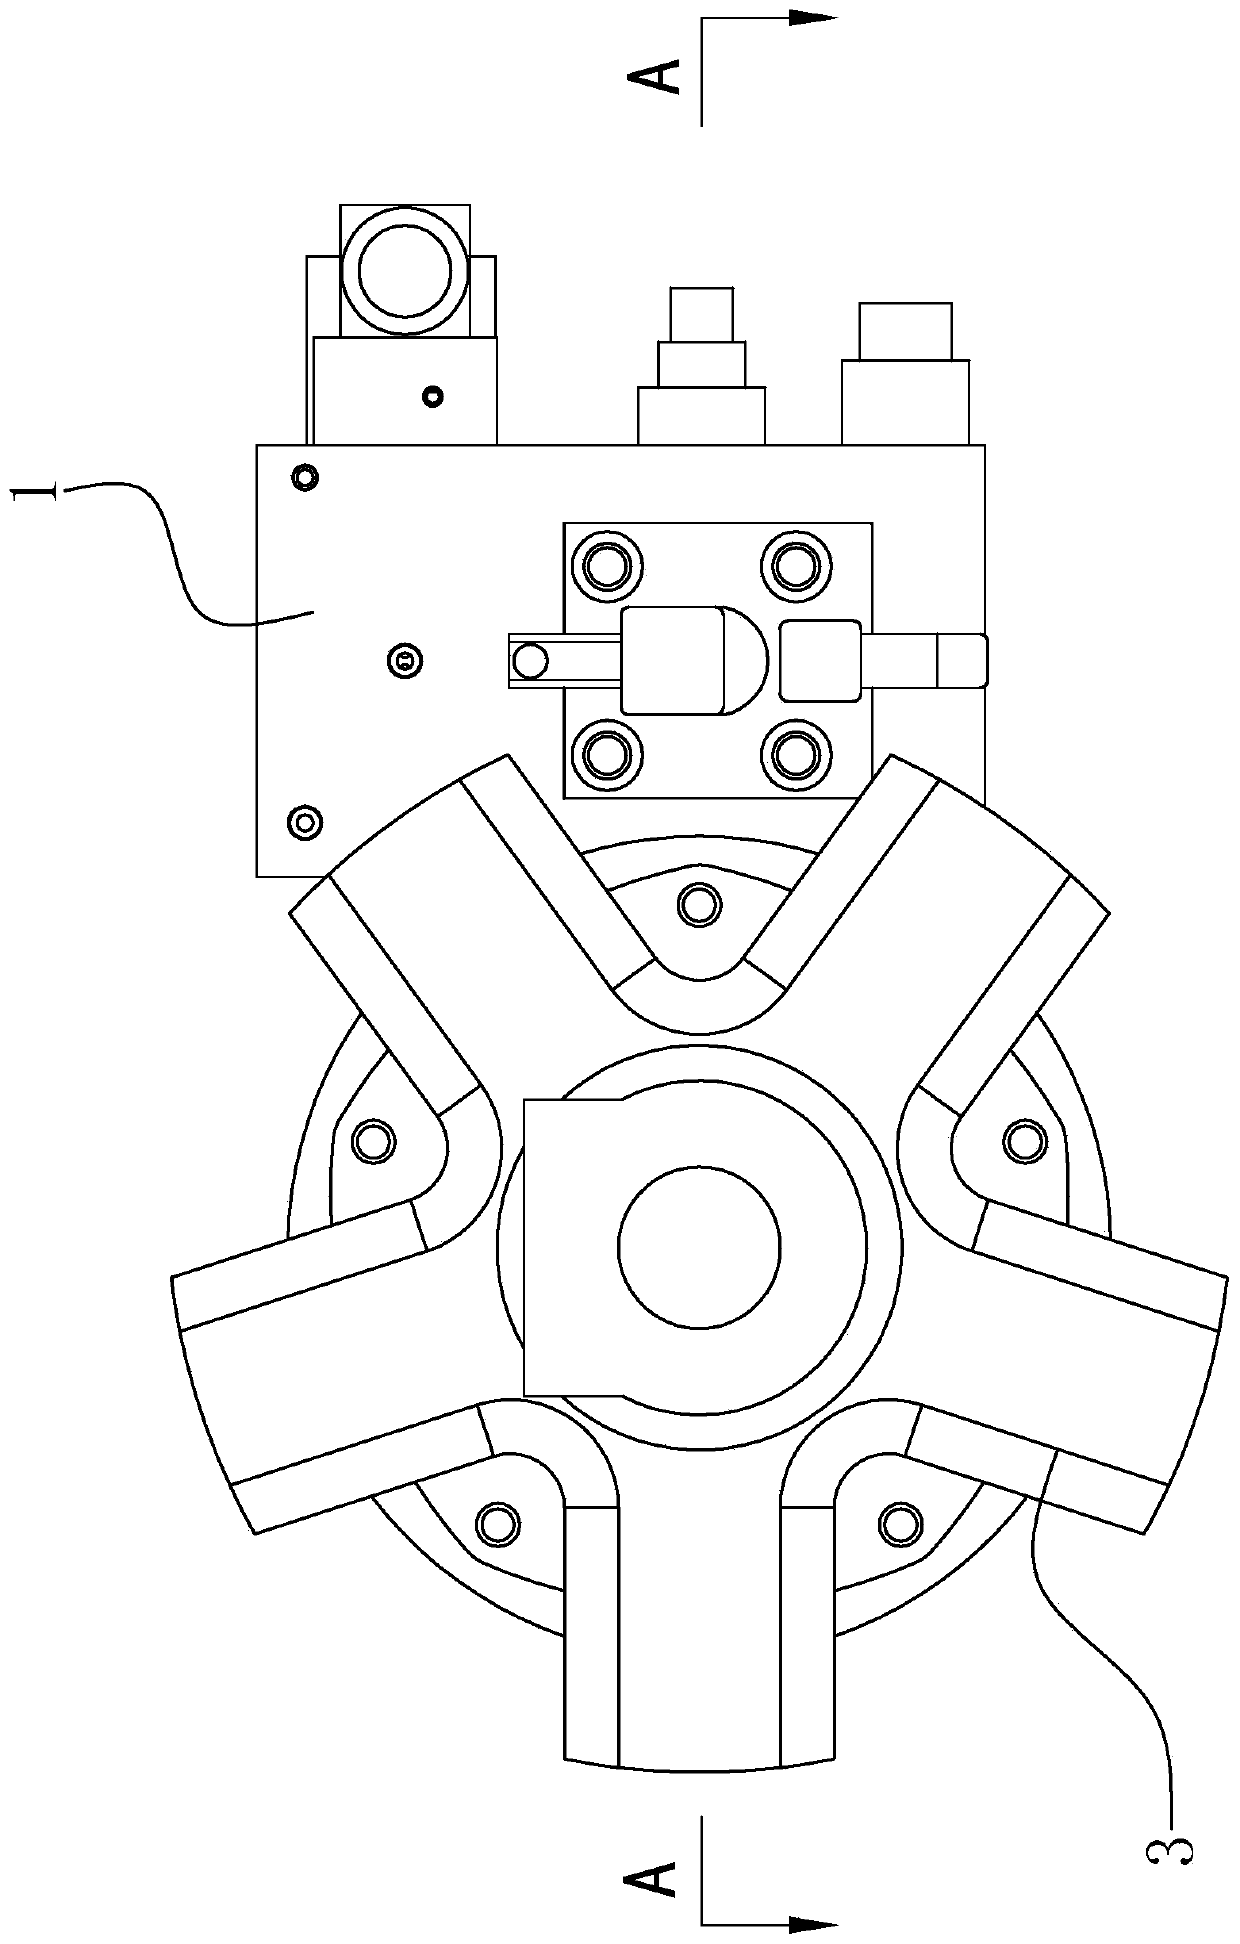 Single-oil-cylinder drive device